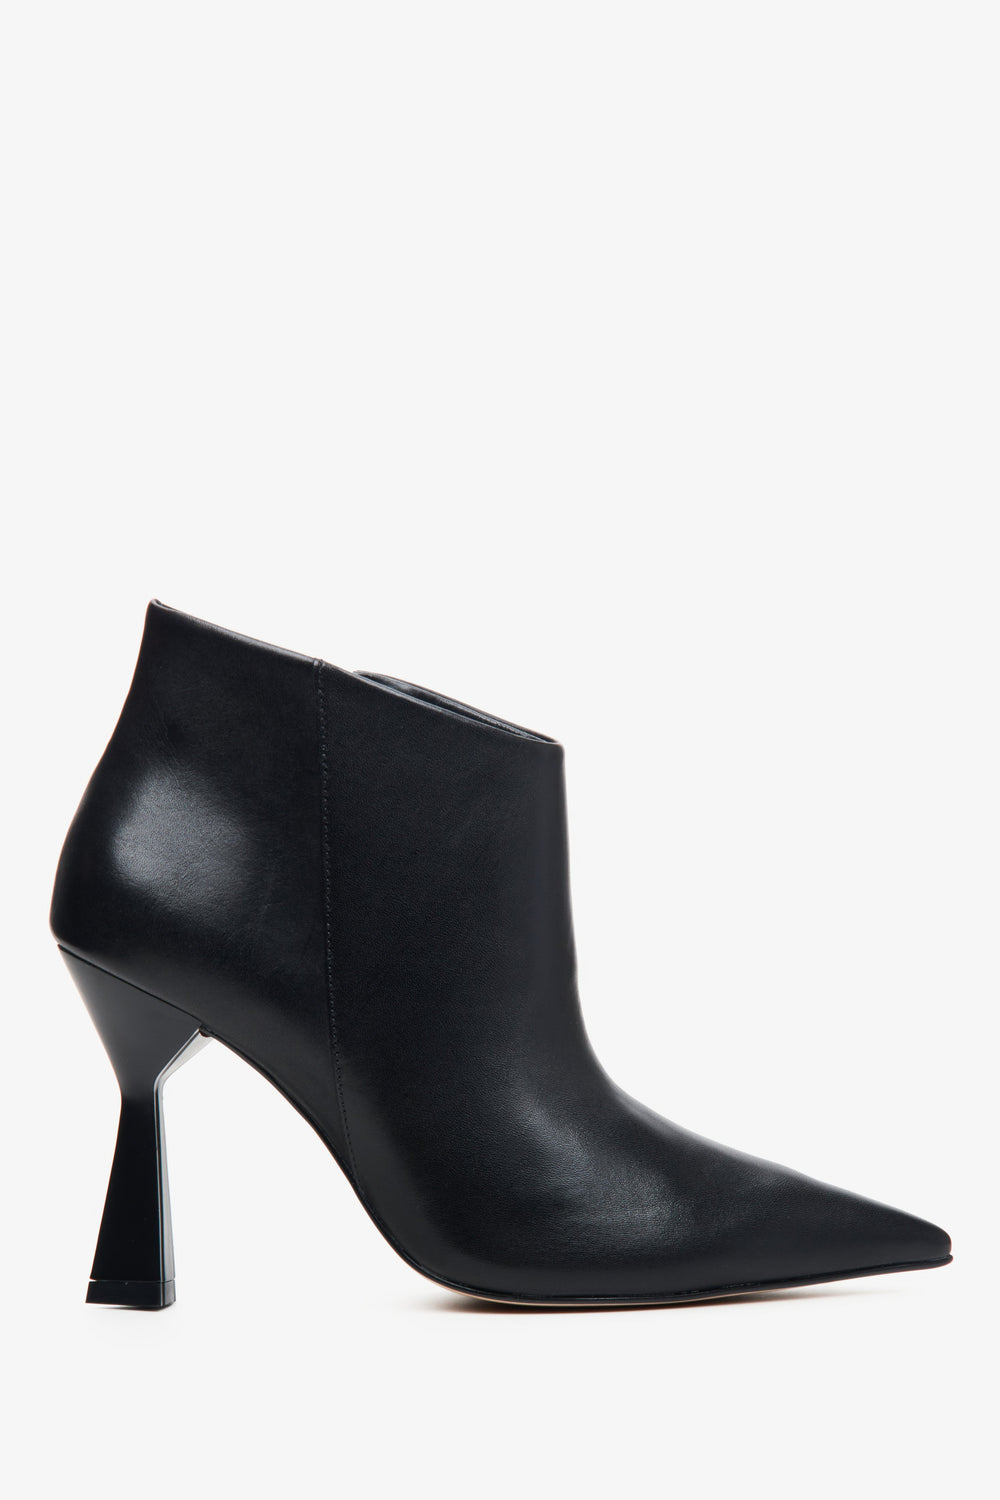 Women's Black Leather Ankle Boots with Heel Estro ER00113714.